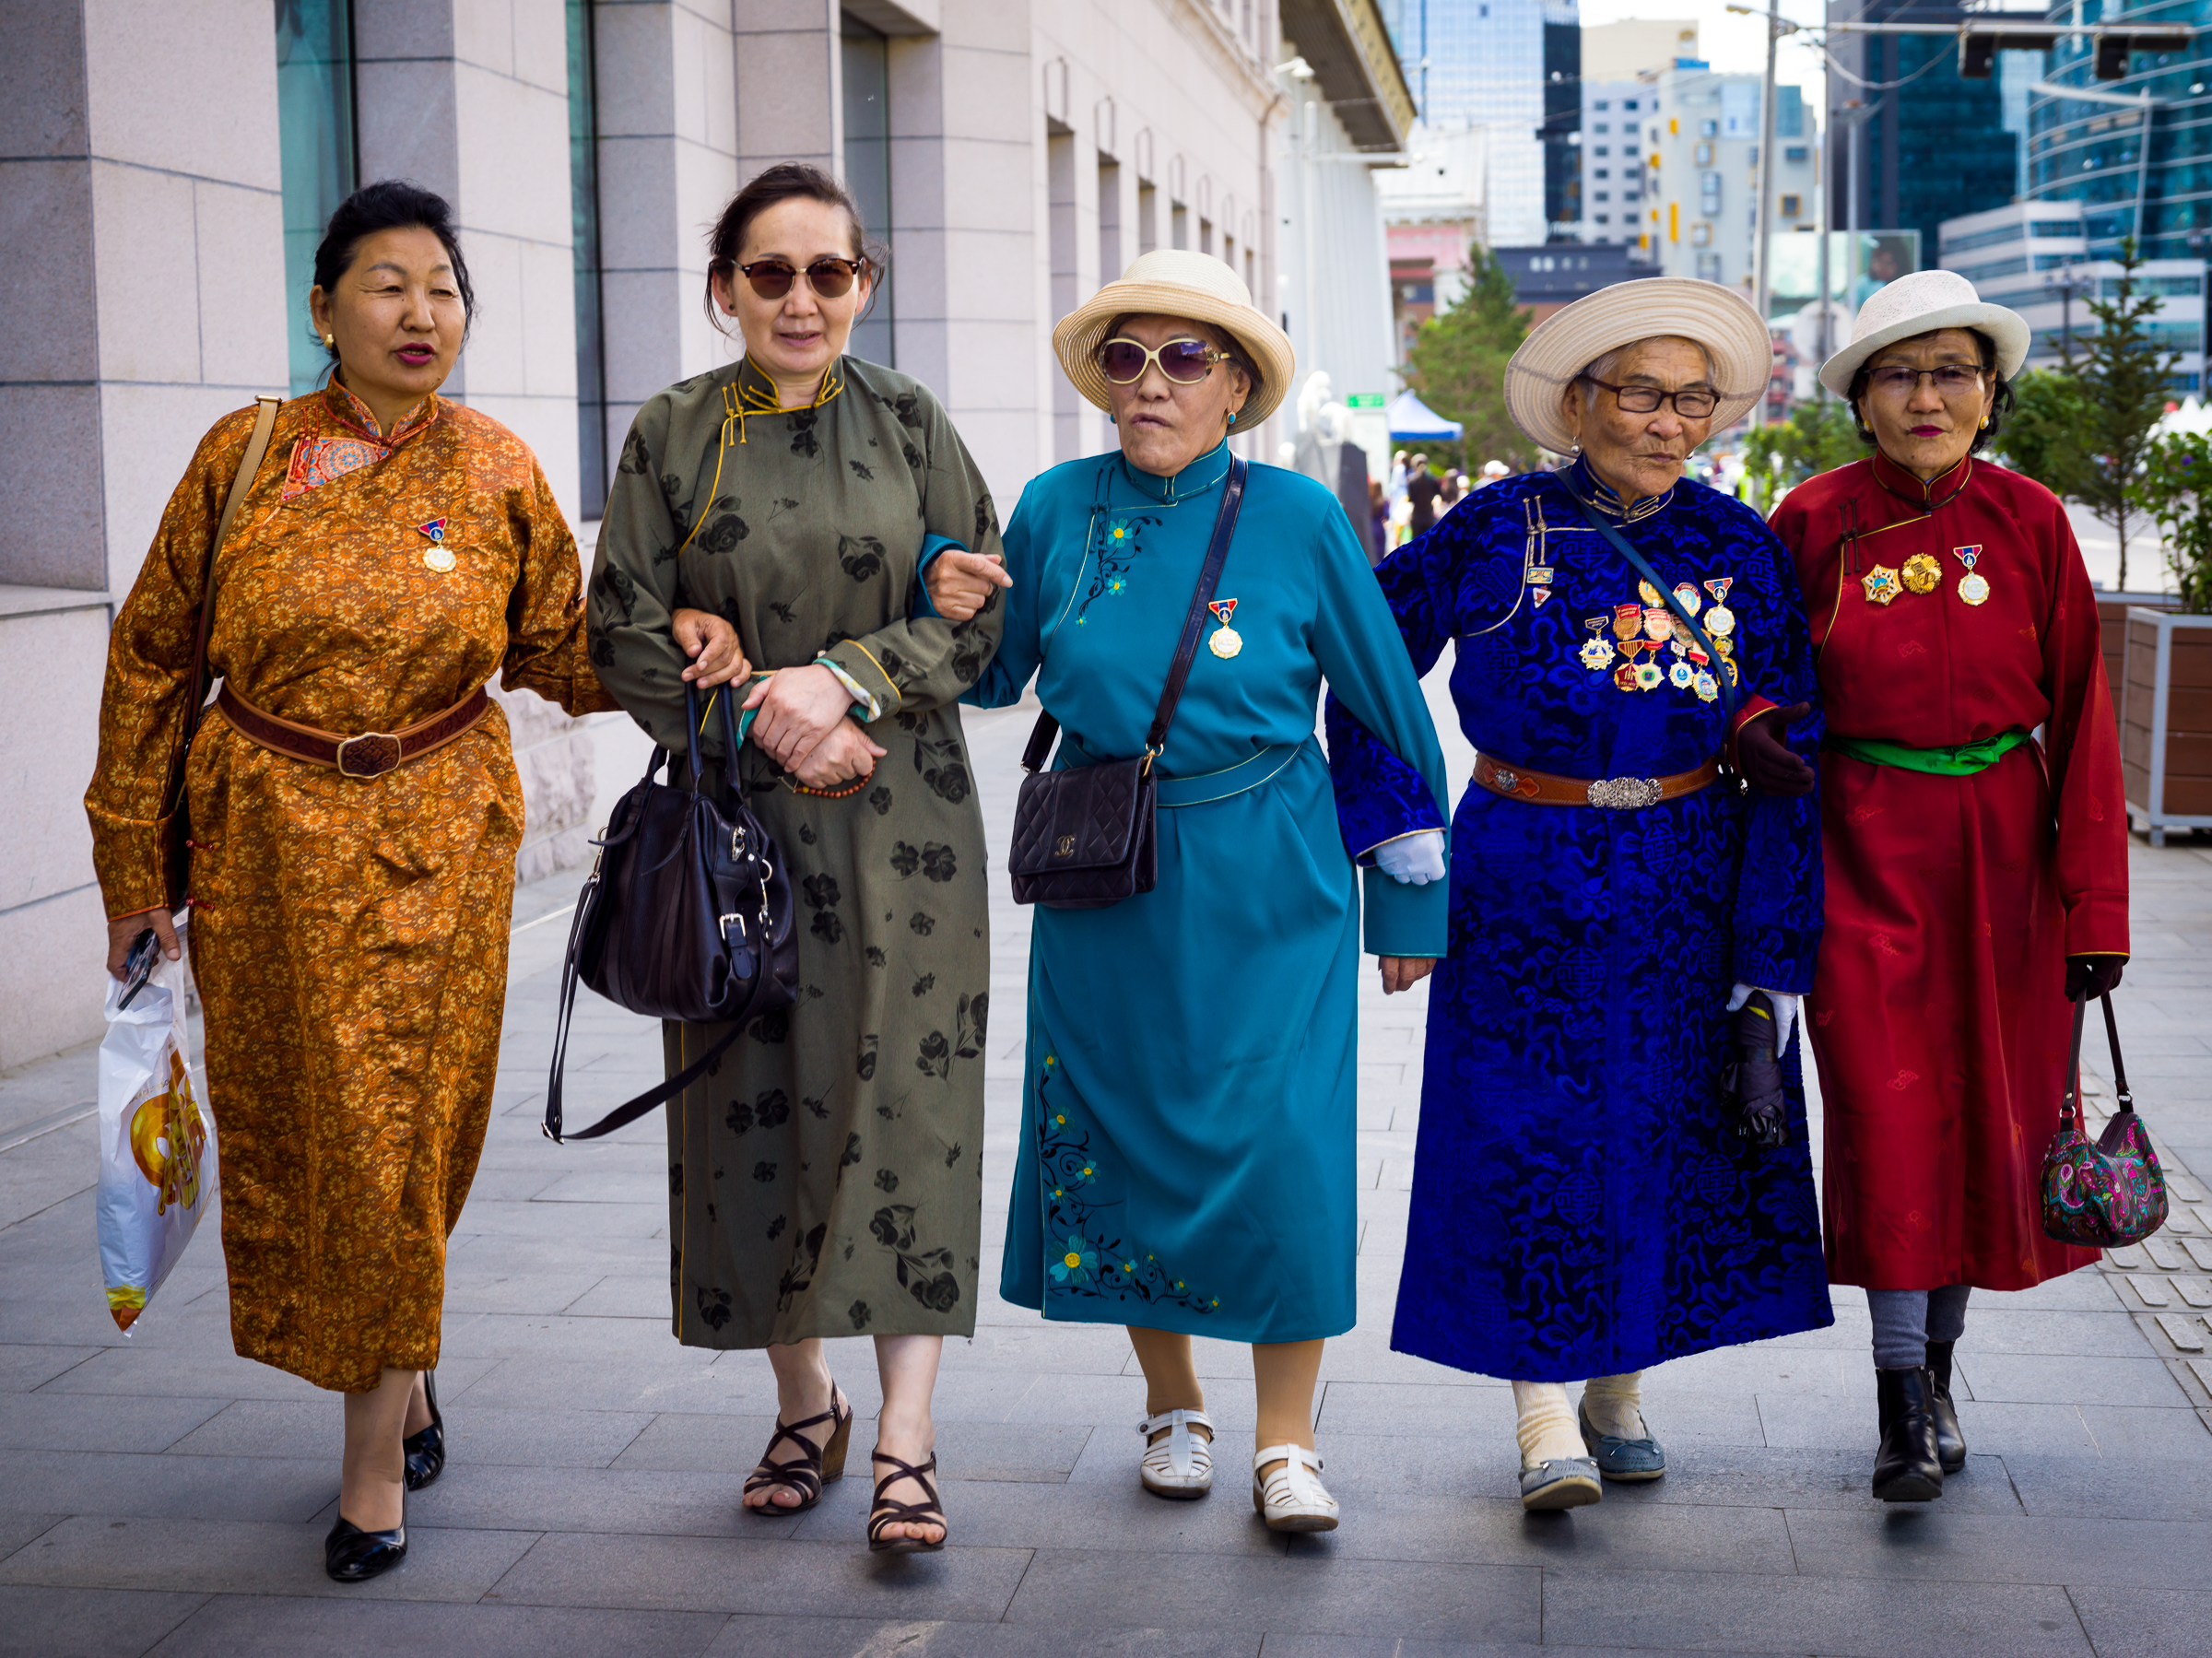 Aunties in Mongolia. "Aunties transcend culture, boundaries, and language. Aunties are universal." © Lola Akinmade Akerstrom, Sweden, entry, Open Competition, Street Photography, 2023 Sony World Photography Awards